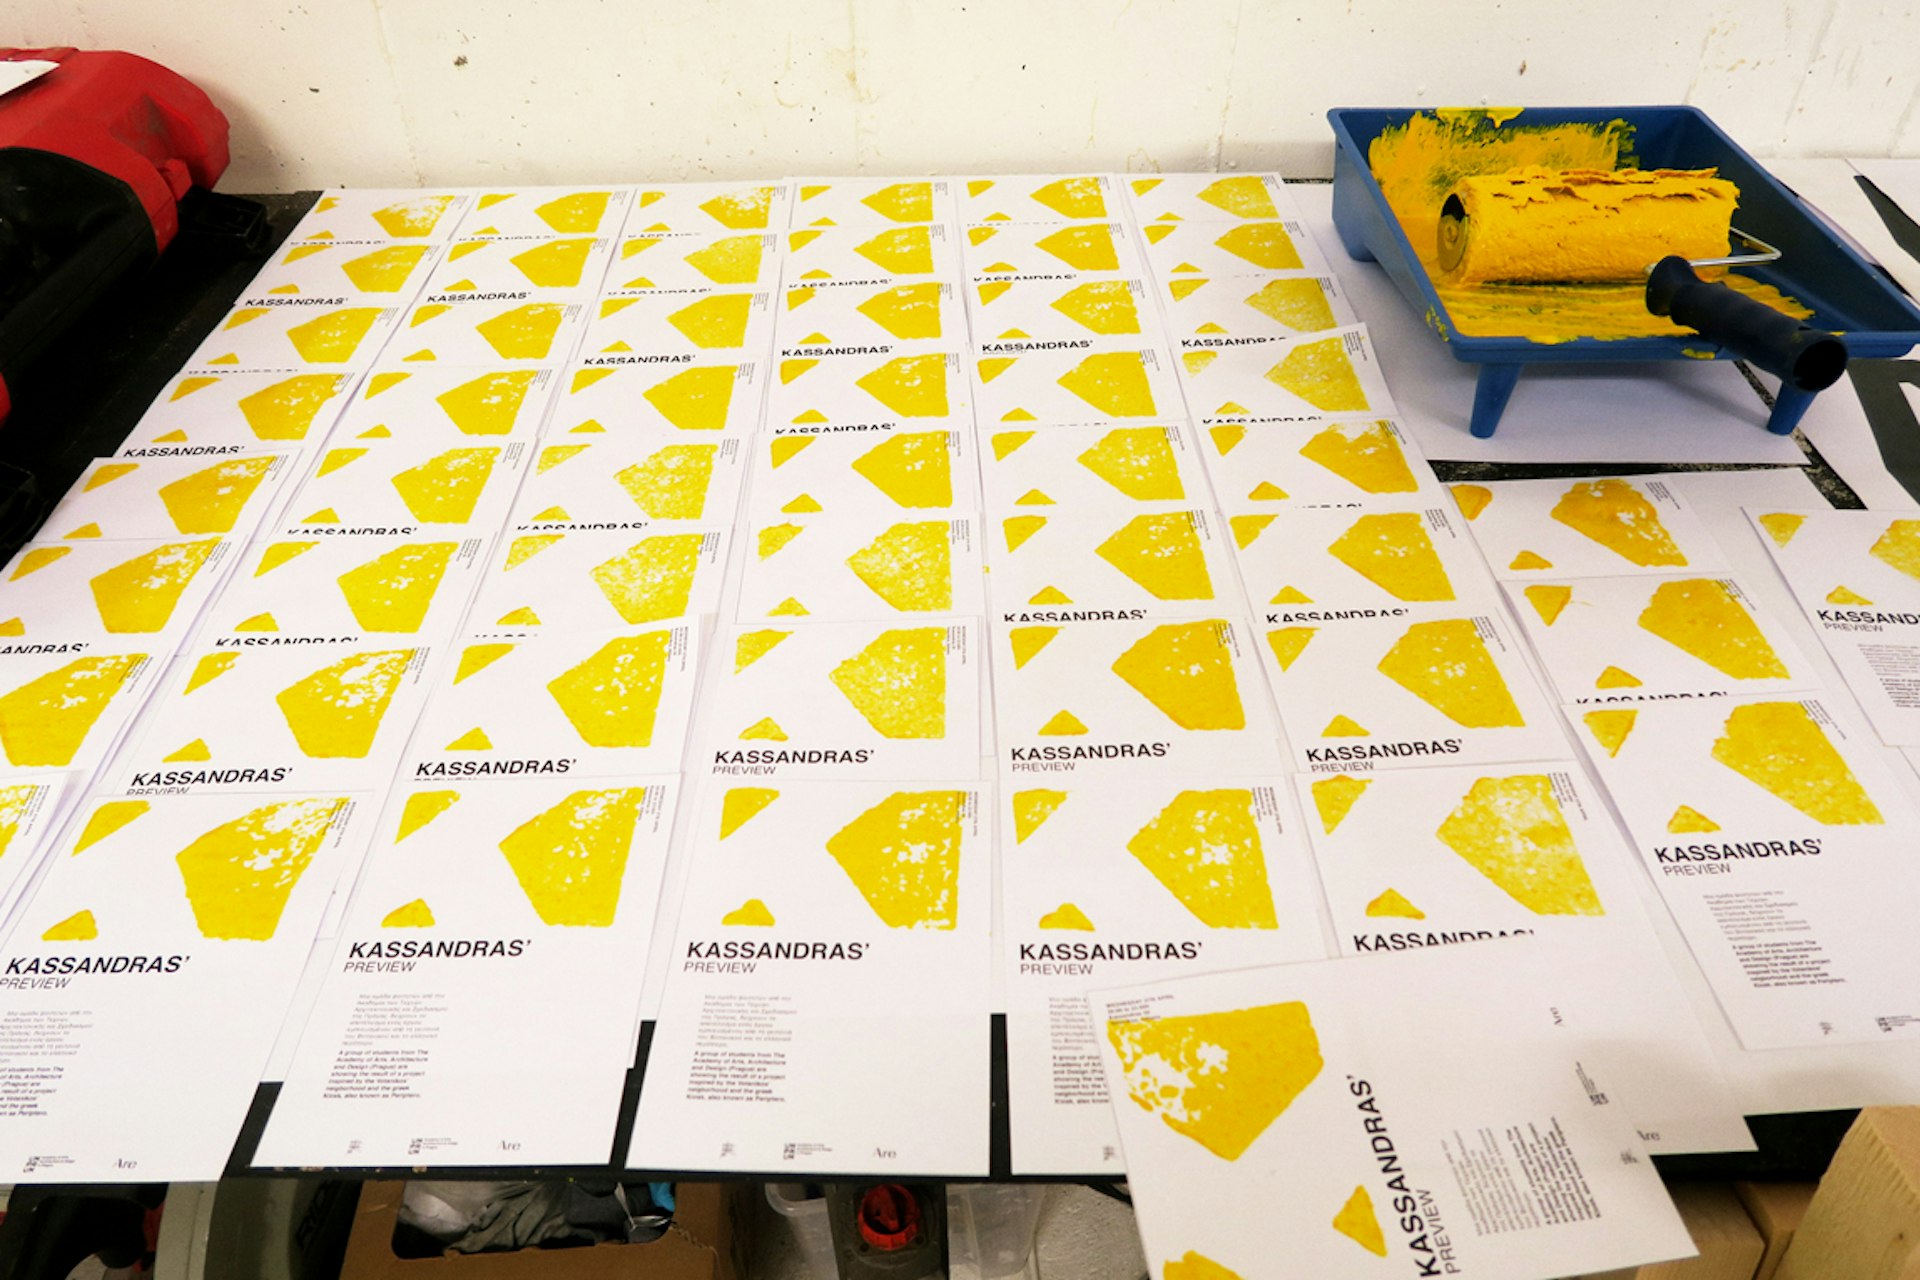 Printing up programmes at Kassandras, a think-tank for sustainable building. Image courtesy of Kassandras.